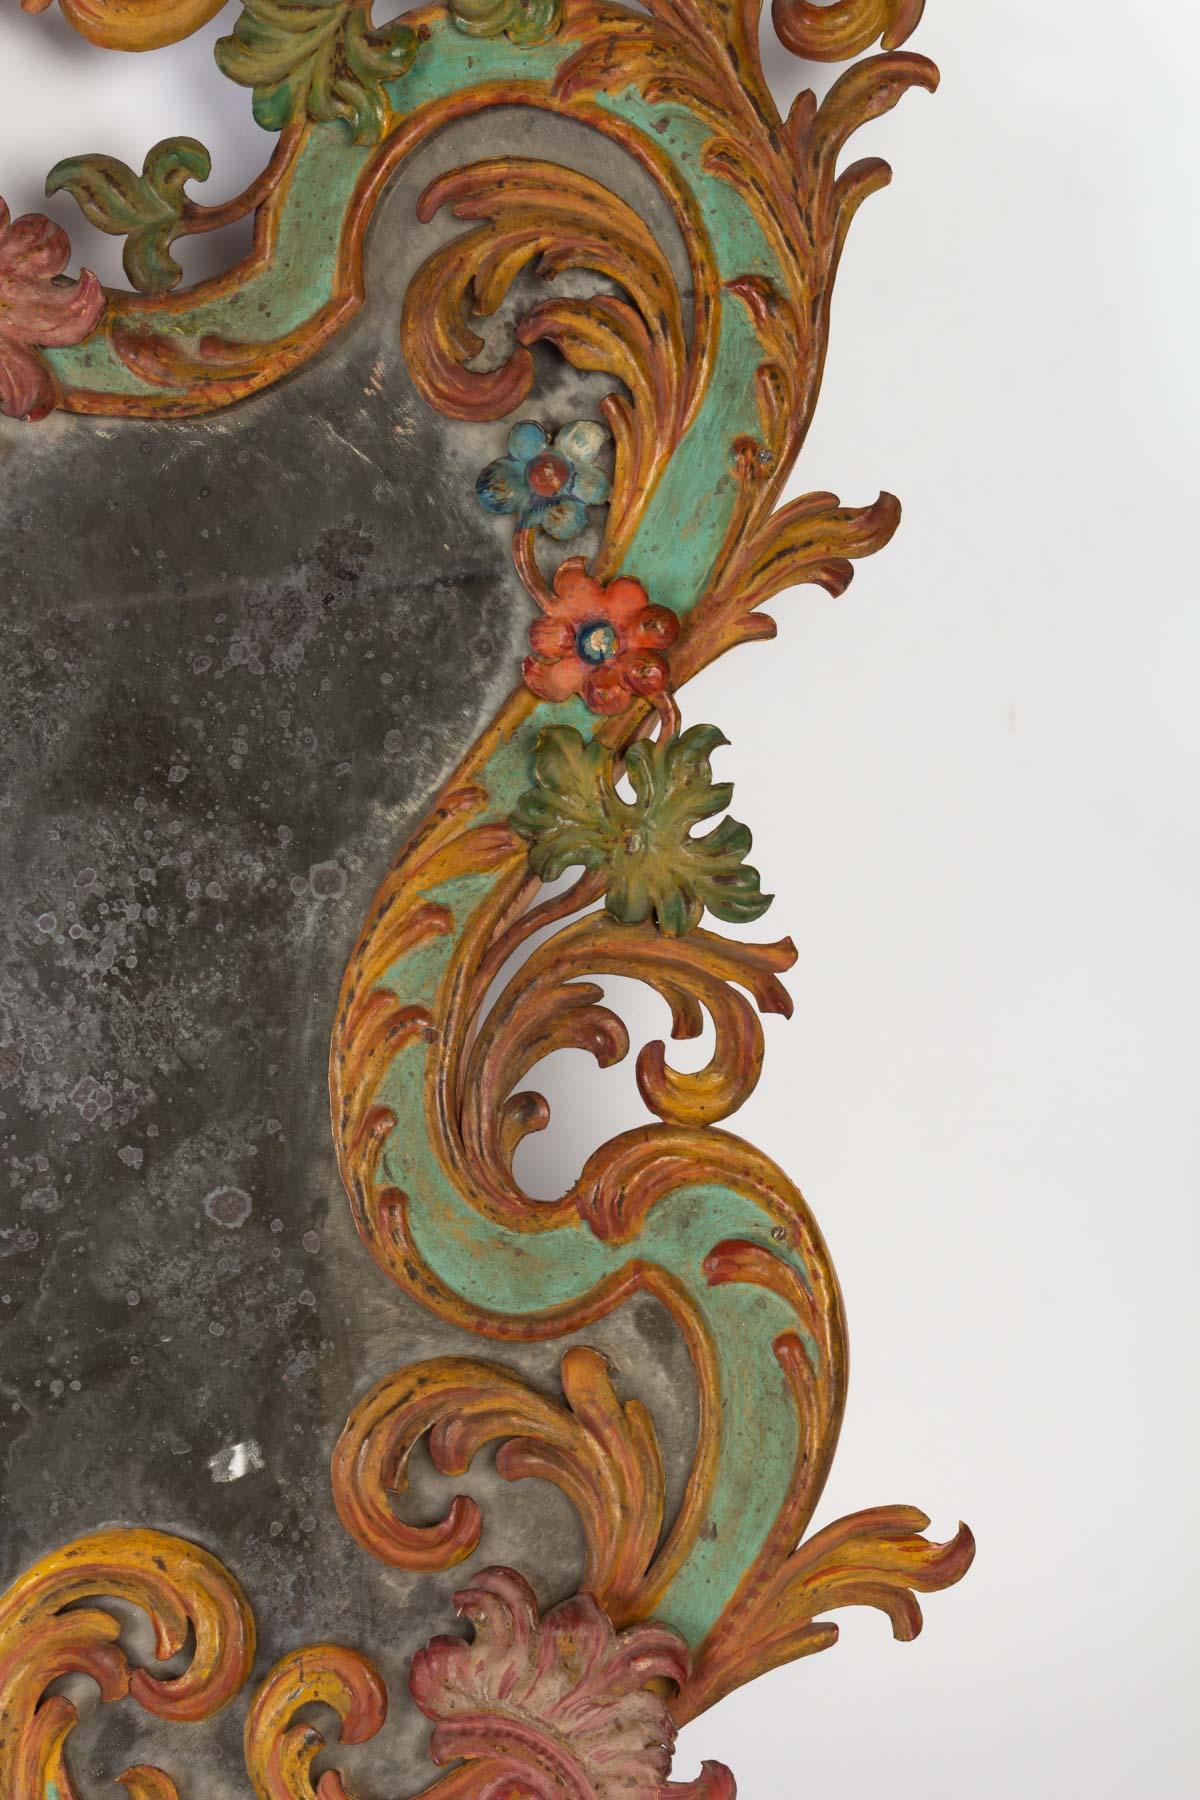 Painted sheet metal mirror, Italy, late 19th century
Measures: H 70cm, W 58cm, D 11cm.